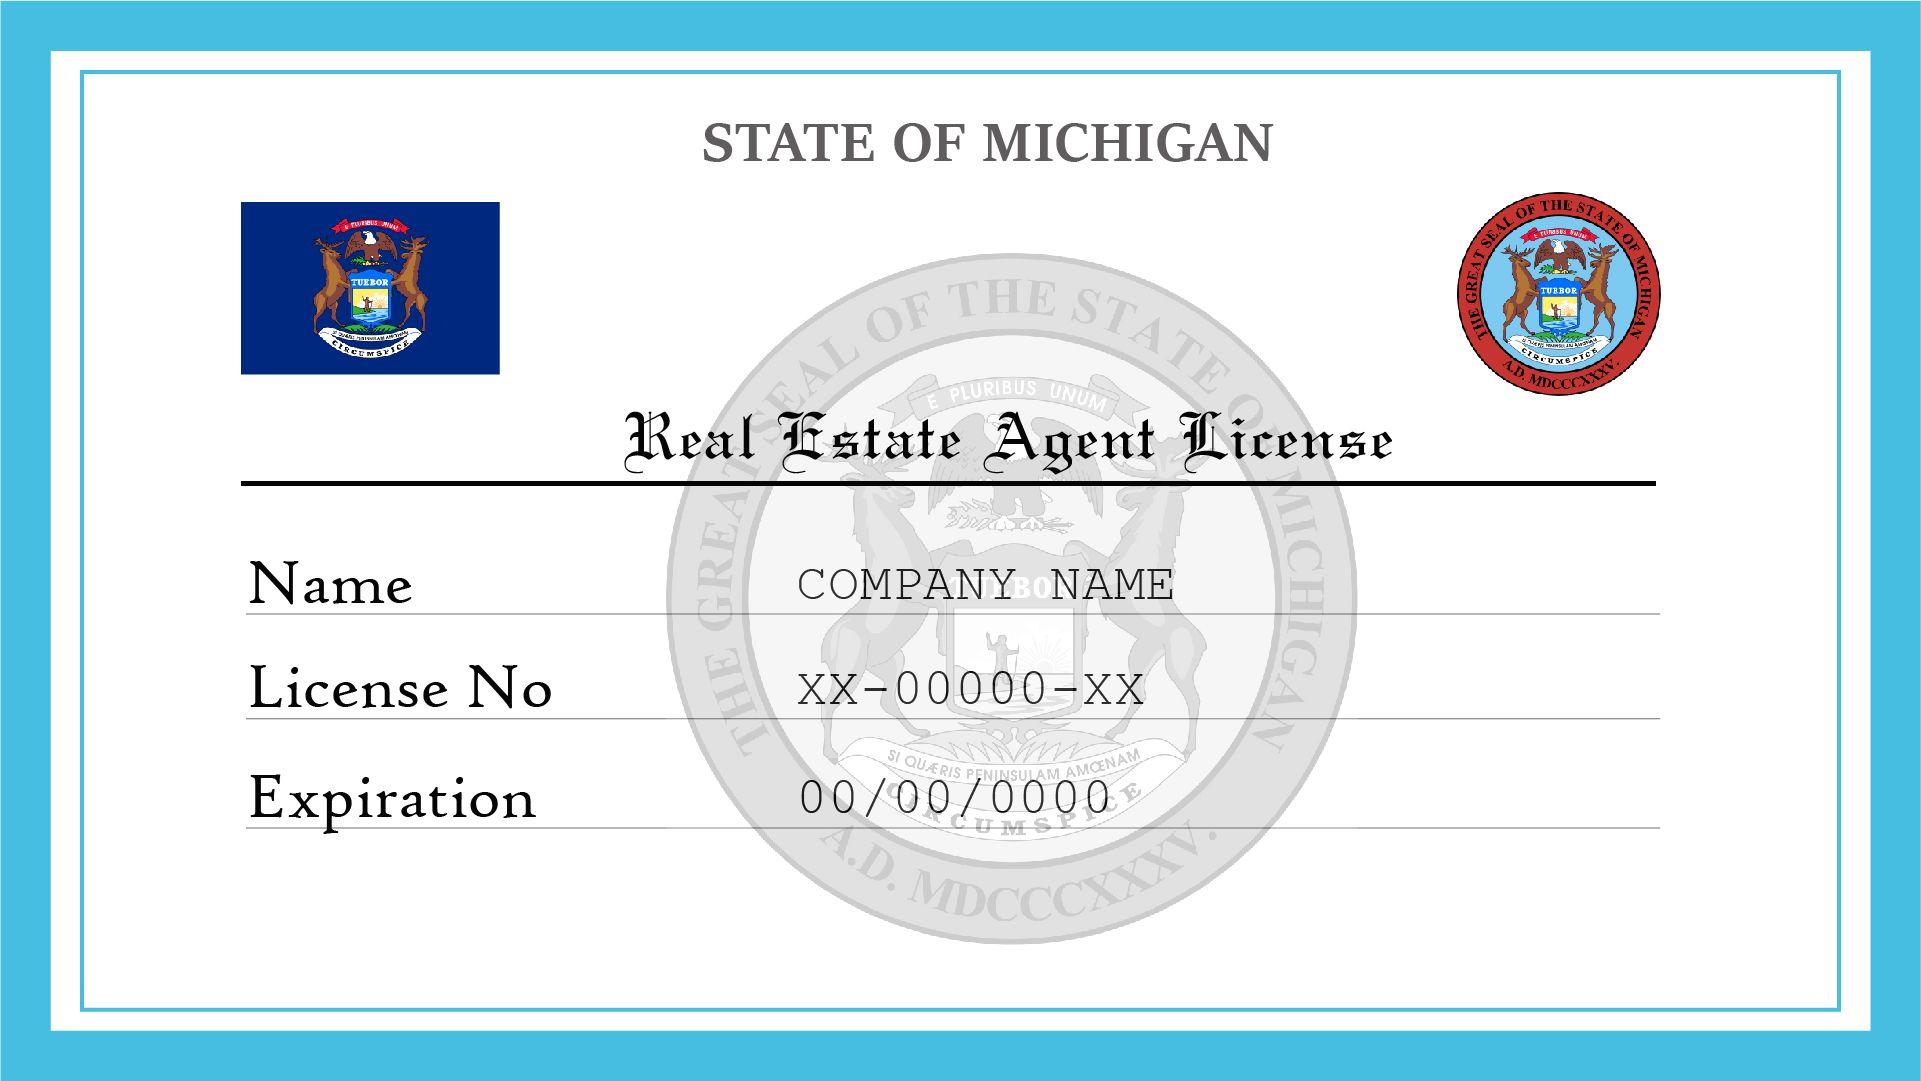 How much is a real estate license in michigan